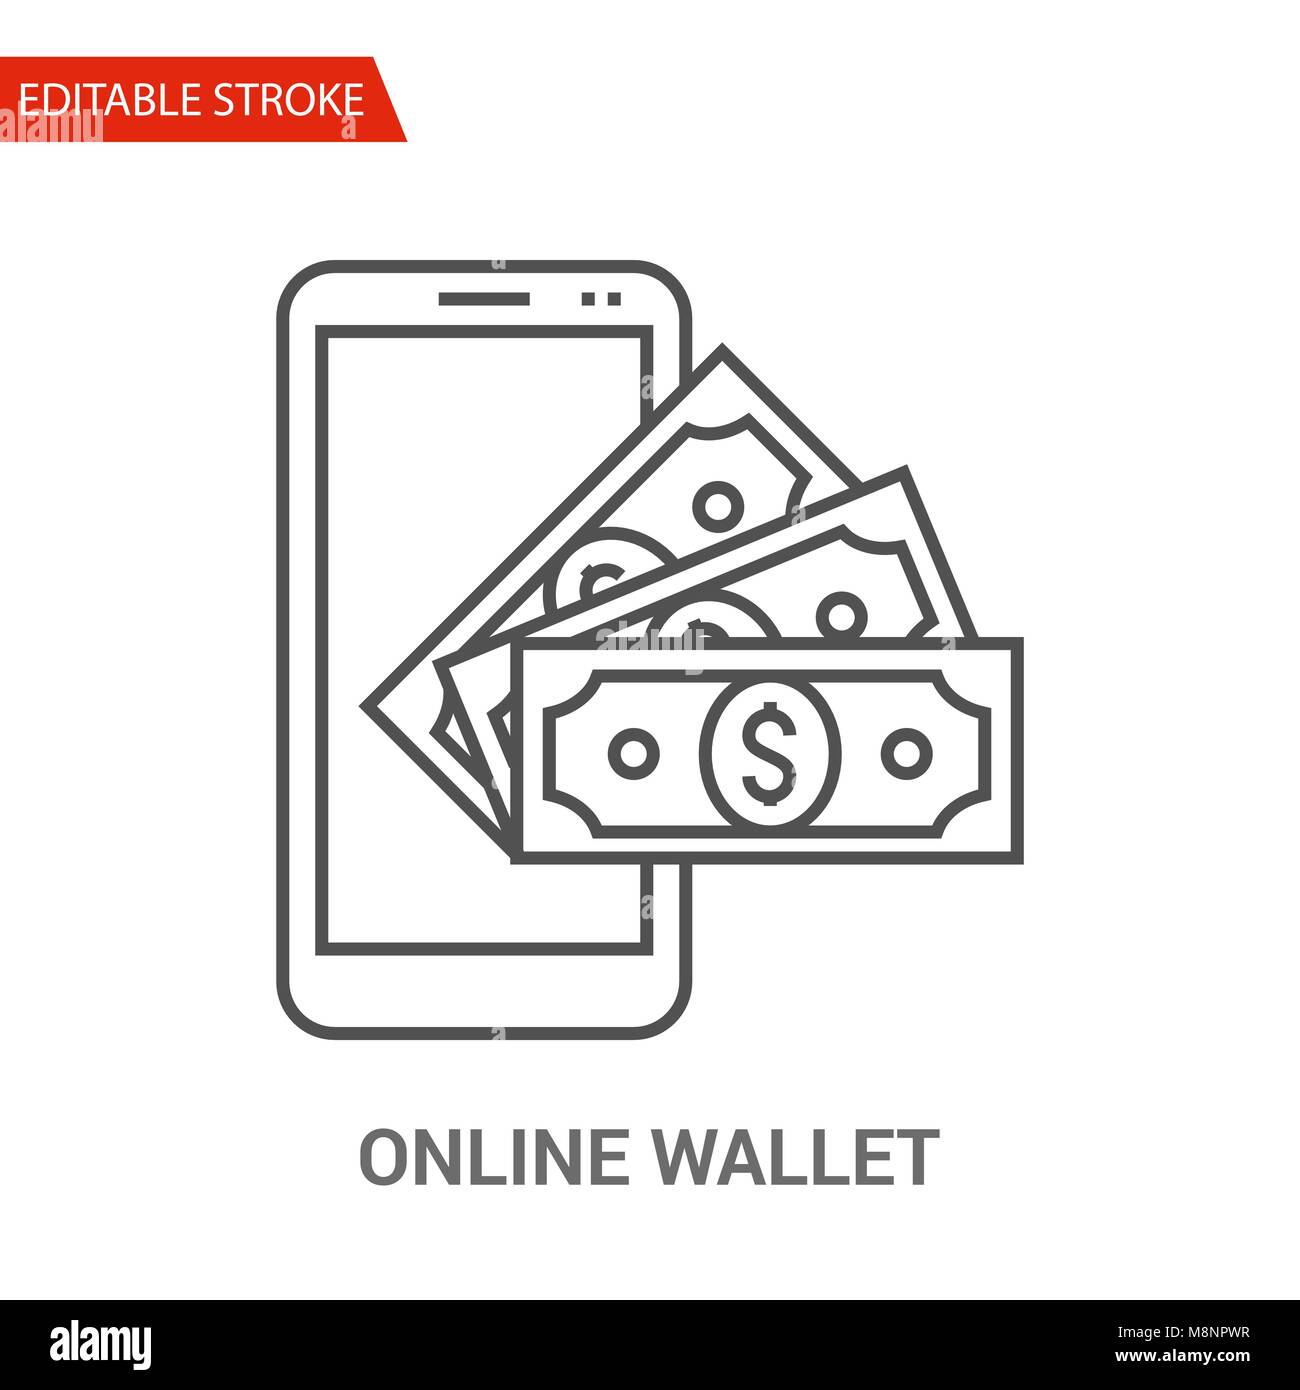 Online Wallet Icon. Thin Line Vector Illustration - Adjust stroke weight - Expand to any Size - Easy Change Colour - Editable Stroke - Pixel Perfect Stock Vector